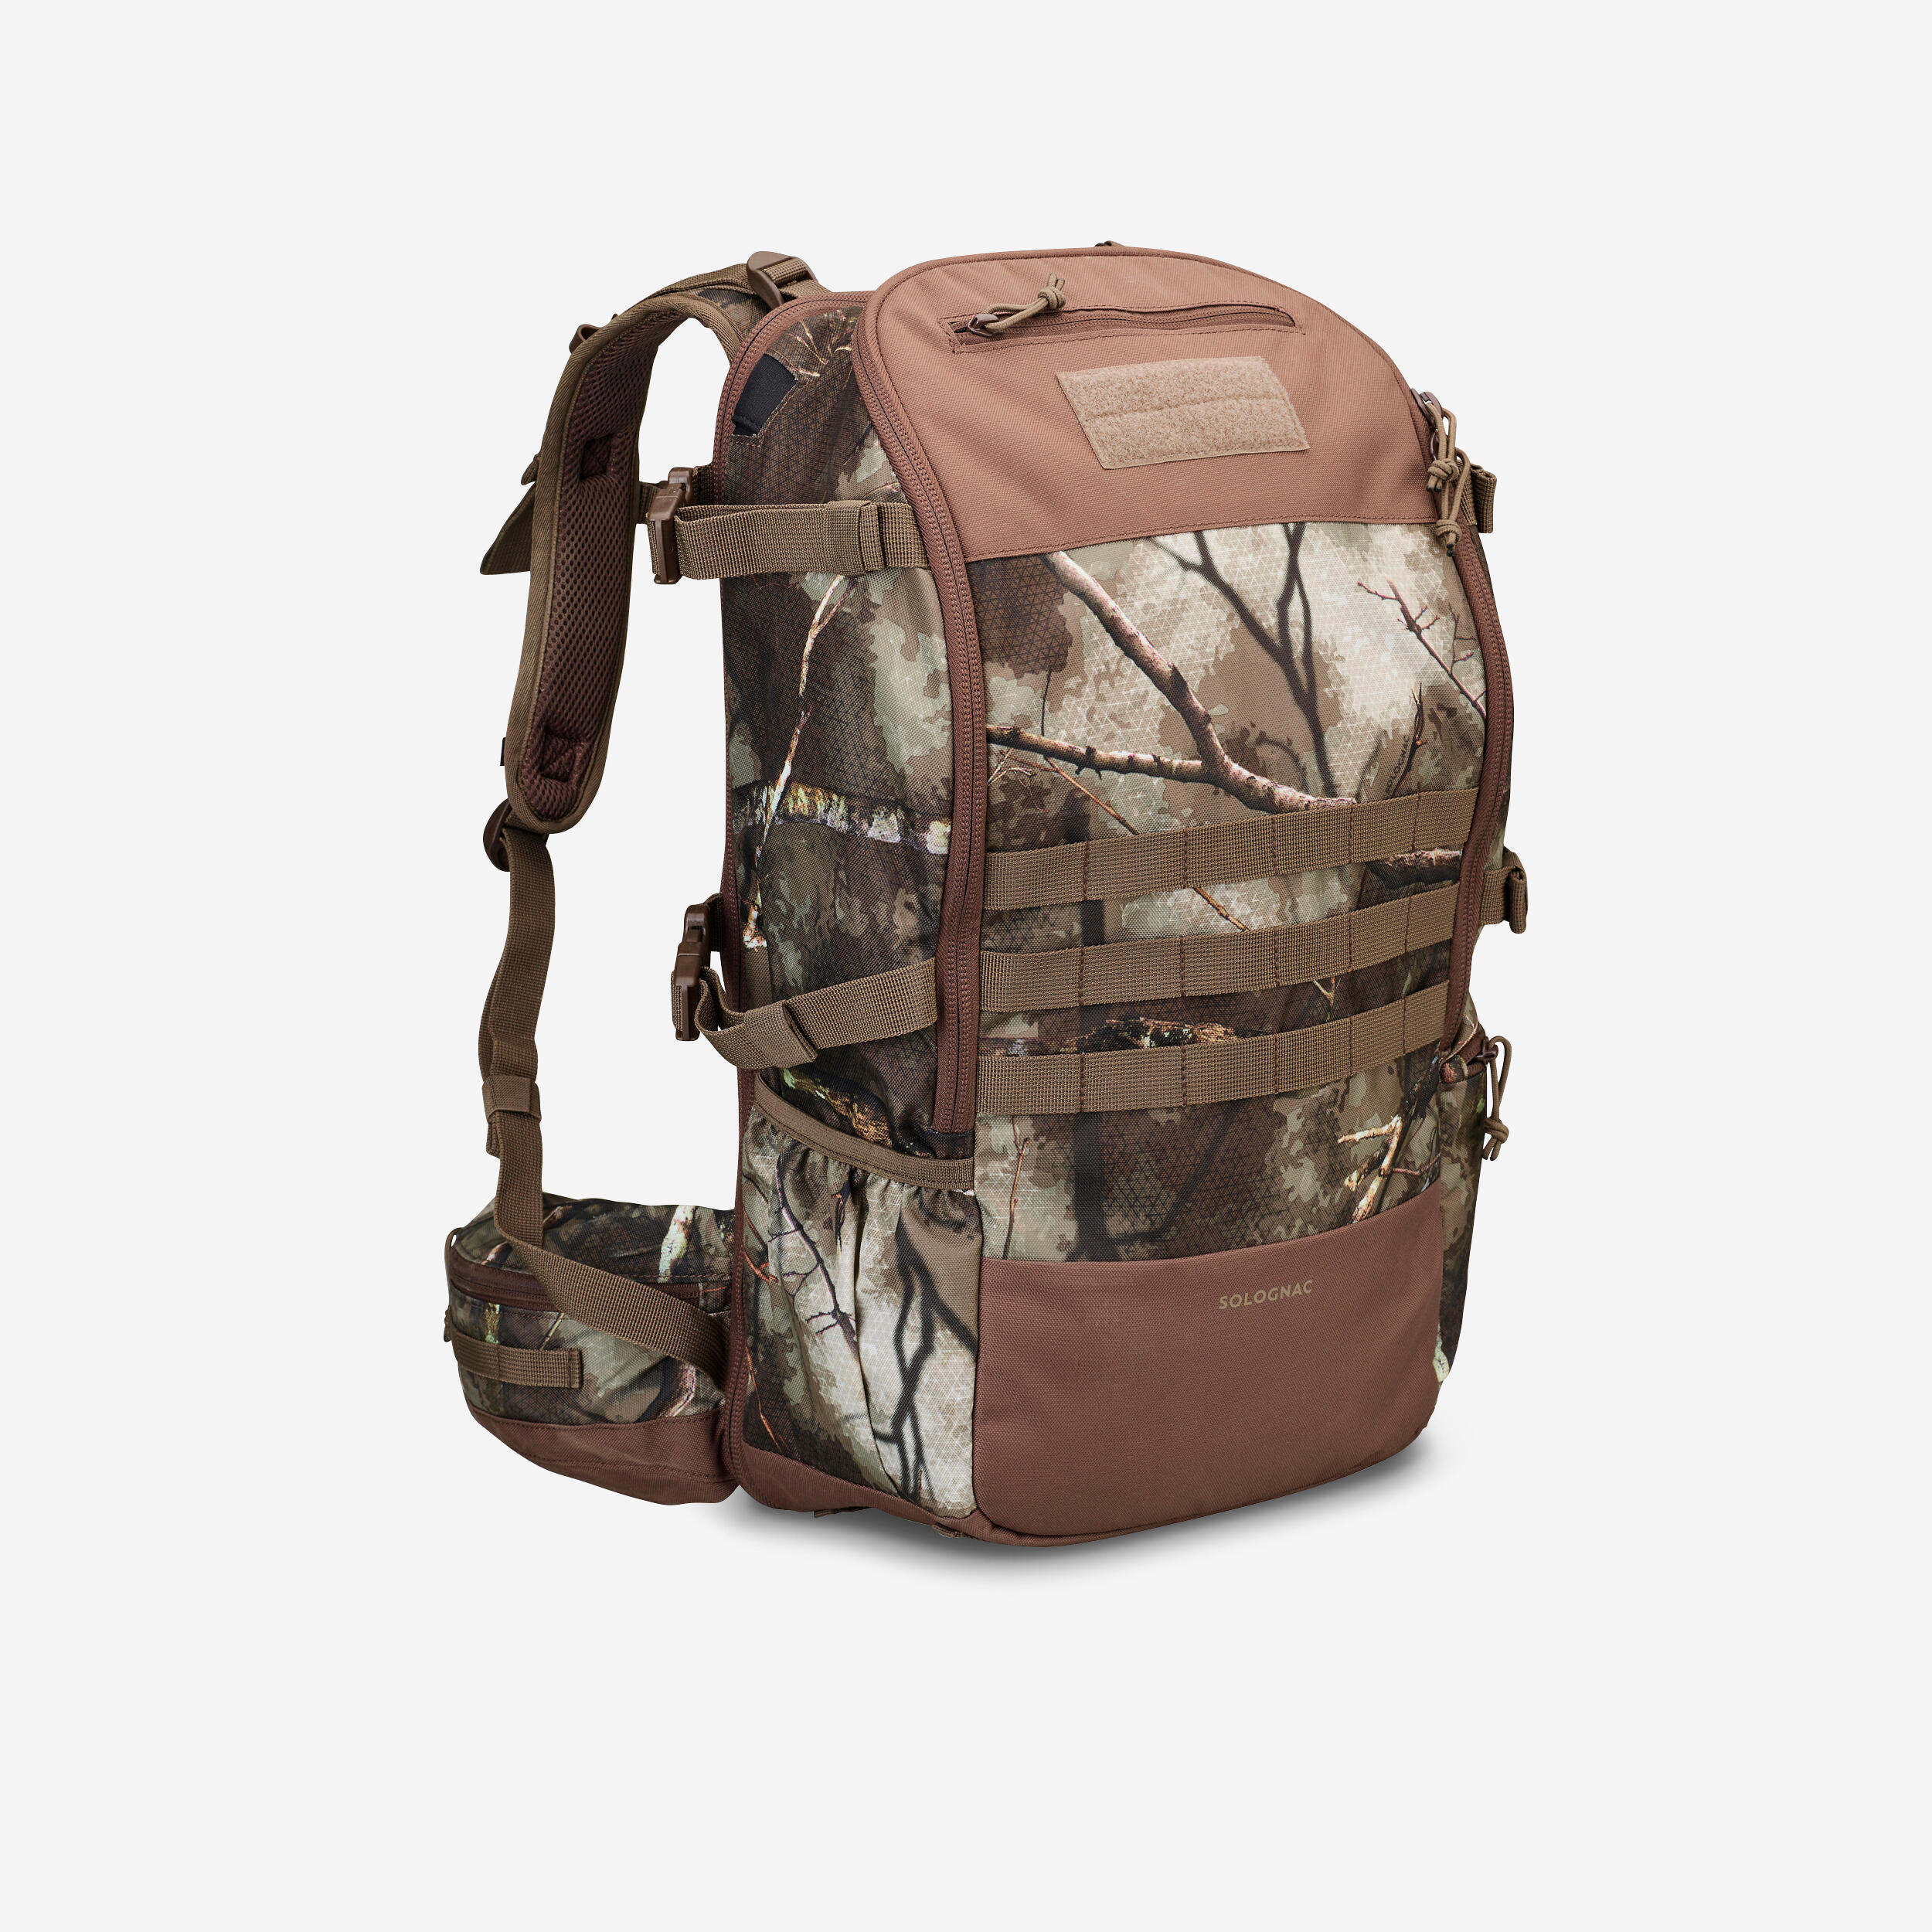 X-Access Compact Country Sport Backpack 45 Litre Treemetic Camouflage 1/11